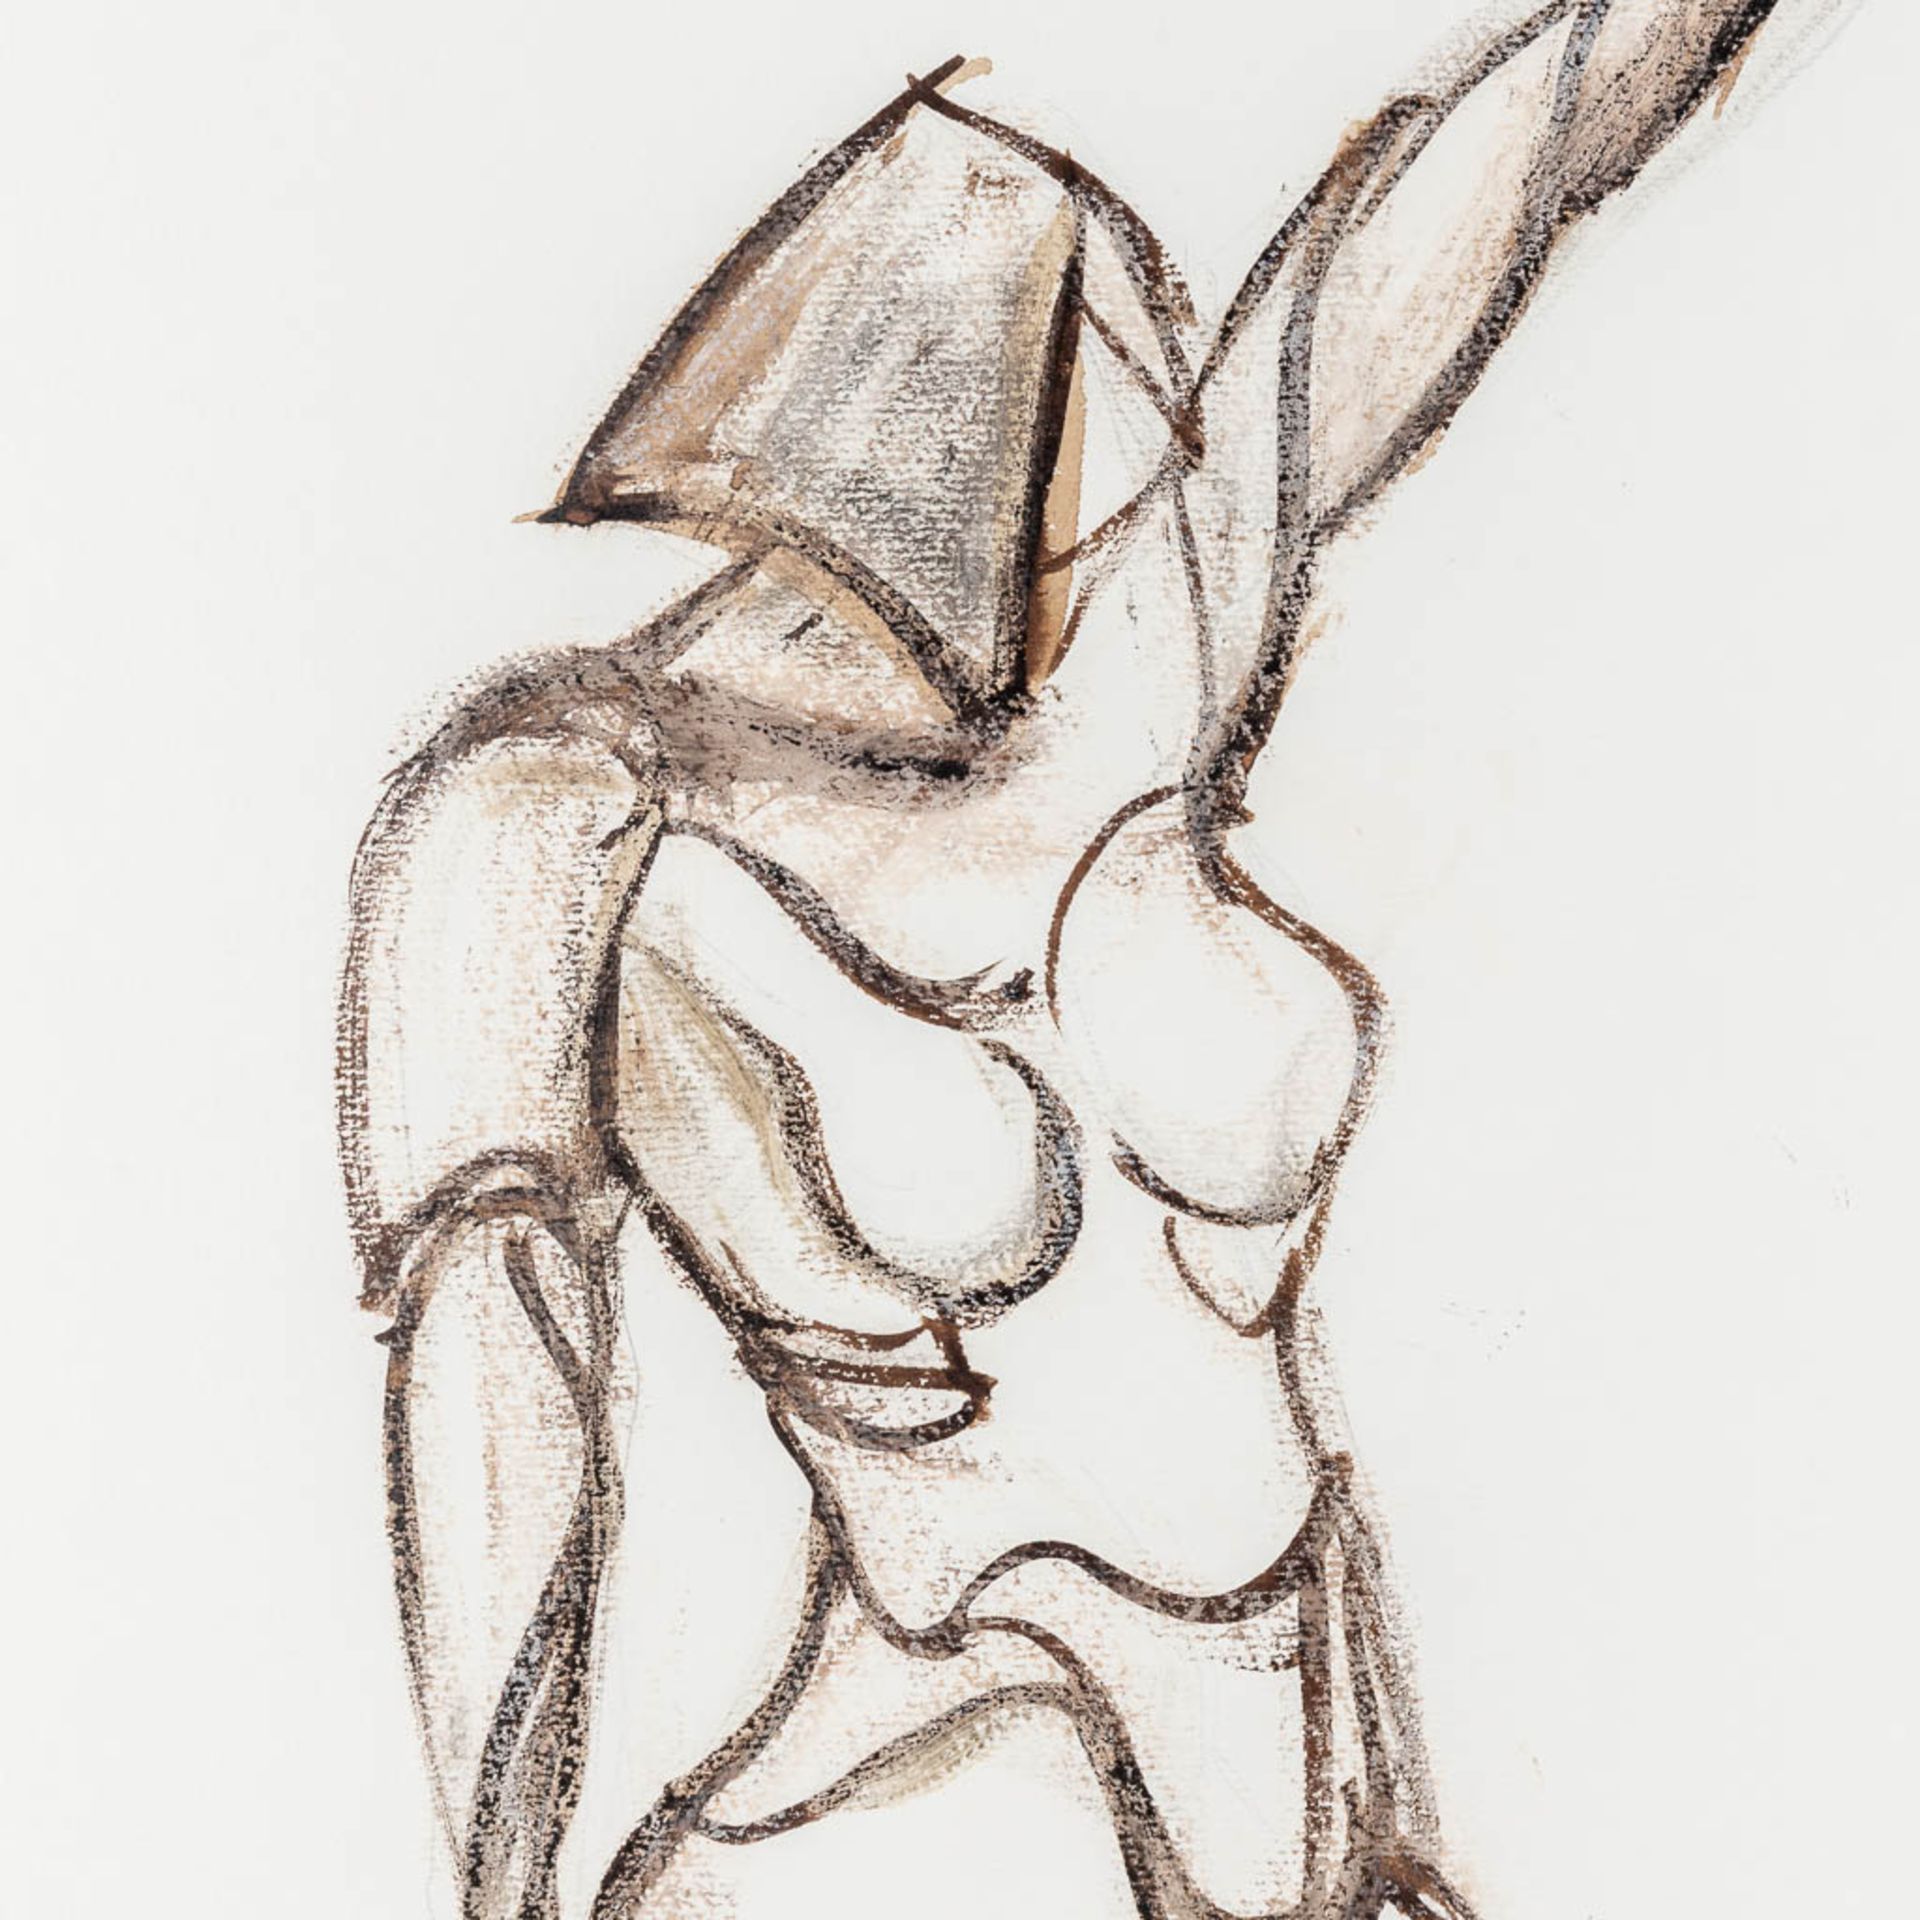 Jeffrie DEVRIESE (1949) 'Figurine' charcoal on paper. 1995 (W:41 x H:59 cm) - Image 5 of 8